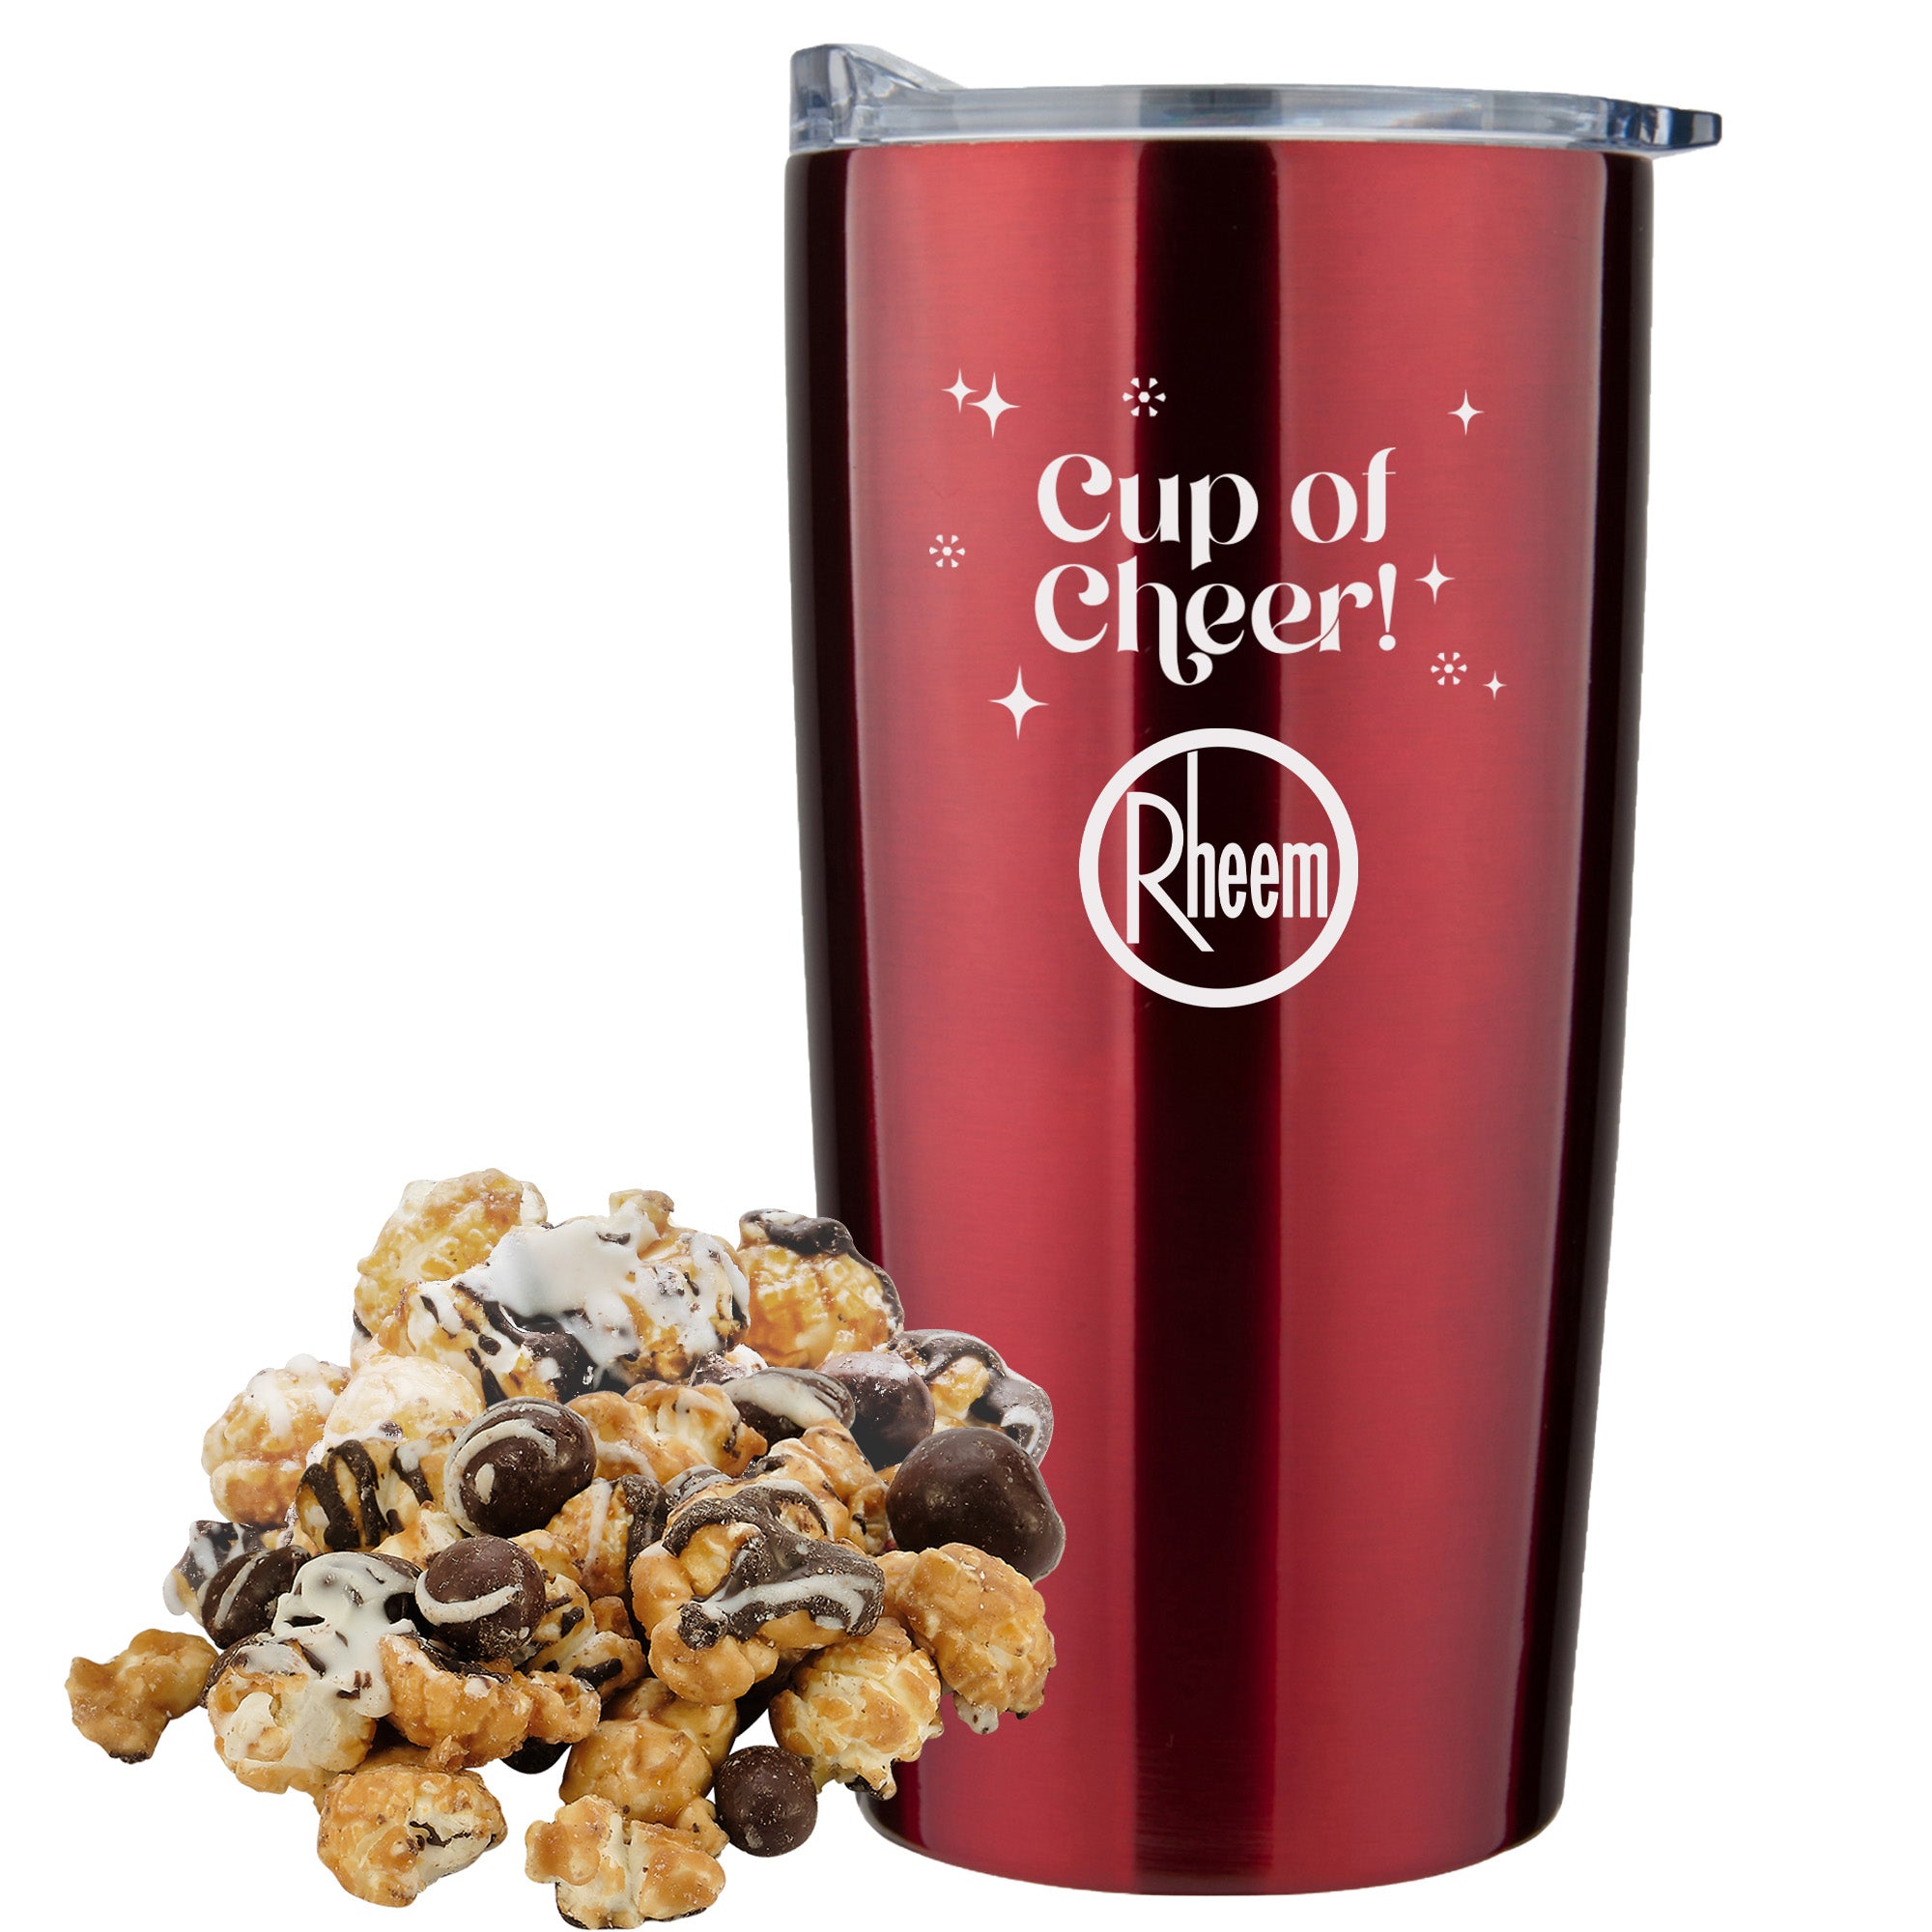 Get That's What I Do I Drink Dr Pepper Personalized Tumbler For